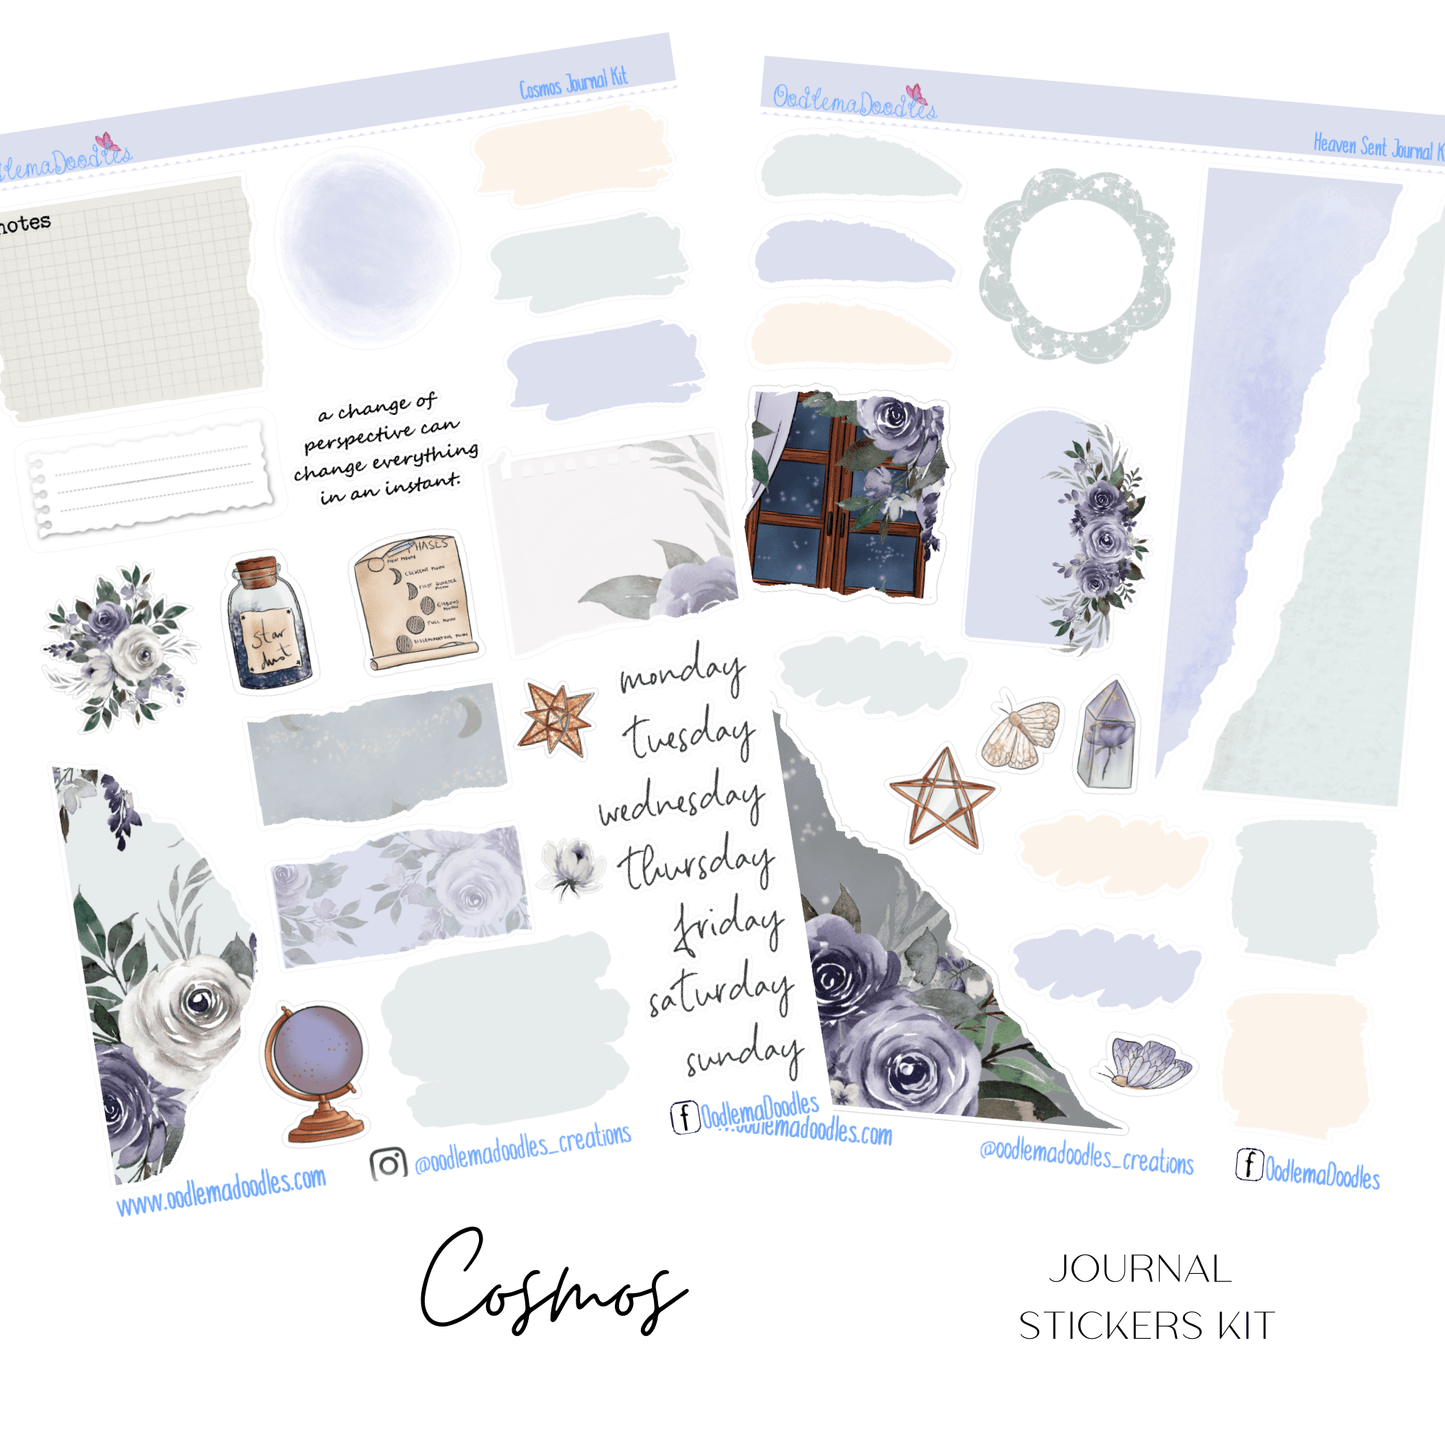 Cosmos Journal Set - oodlemadoodles